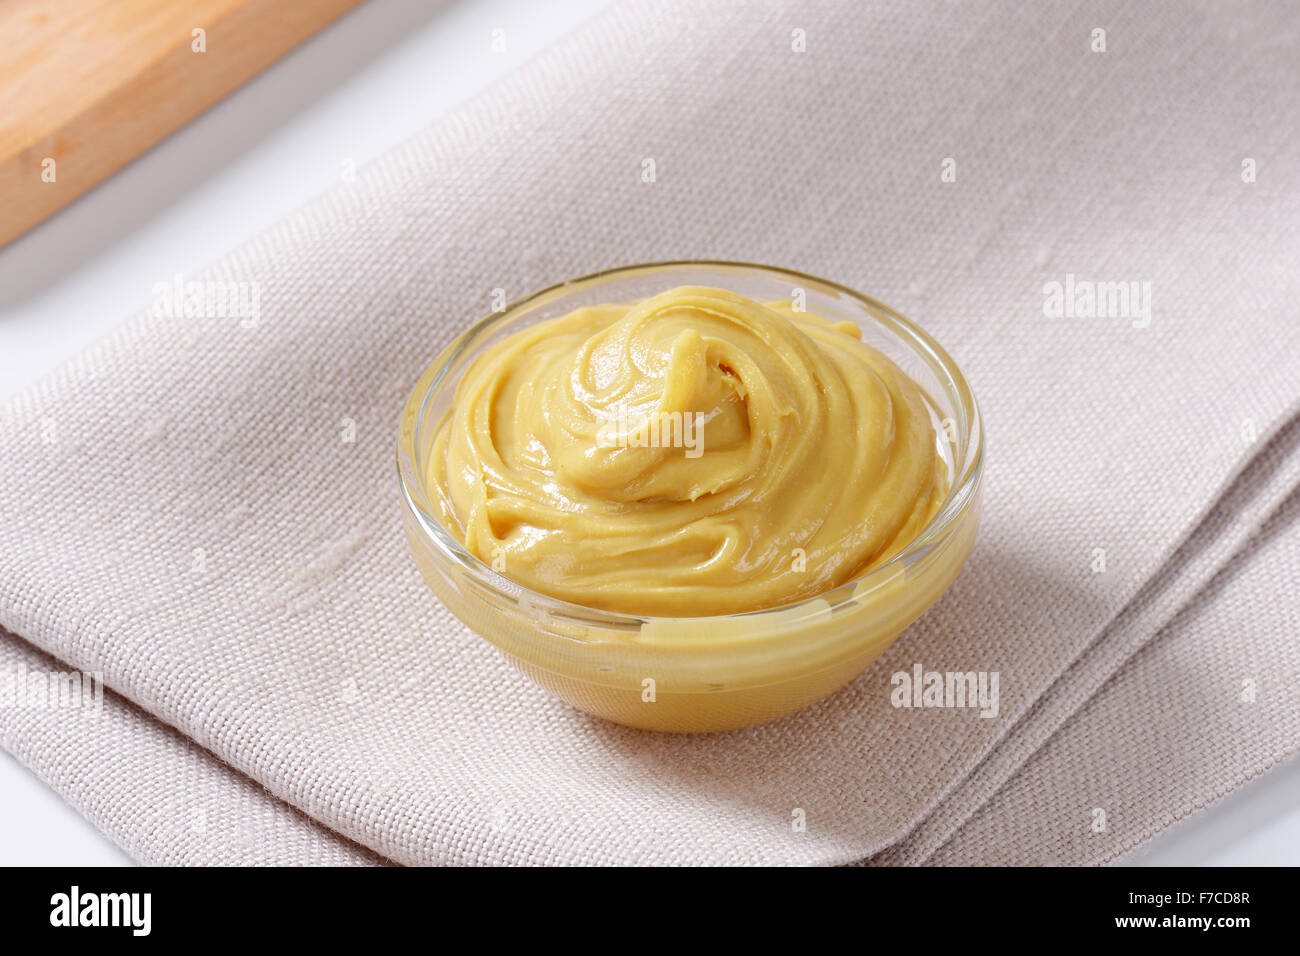 Bowl of smooth peanut butter Stock Photo